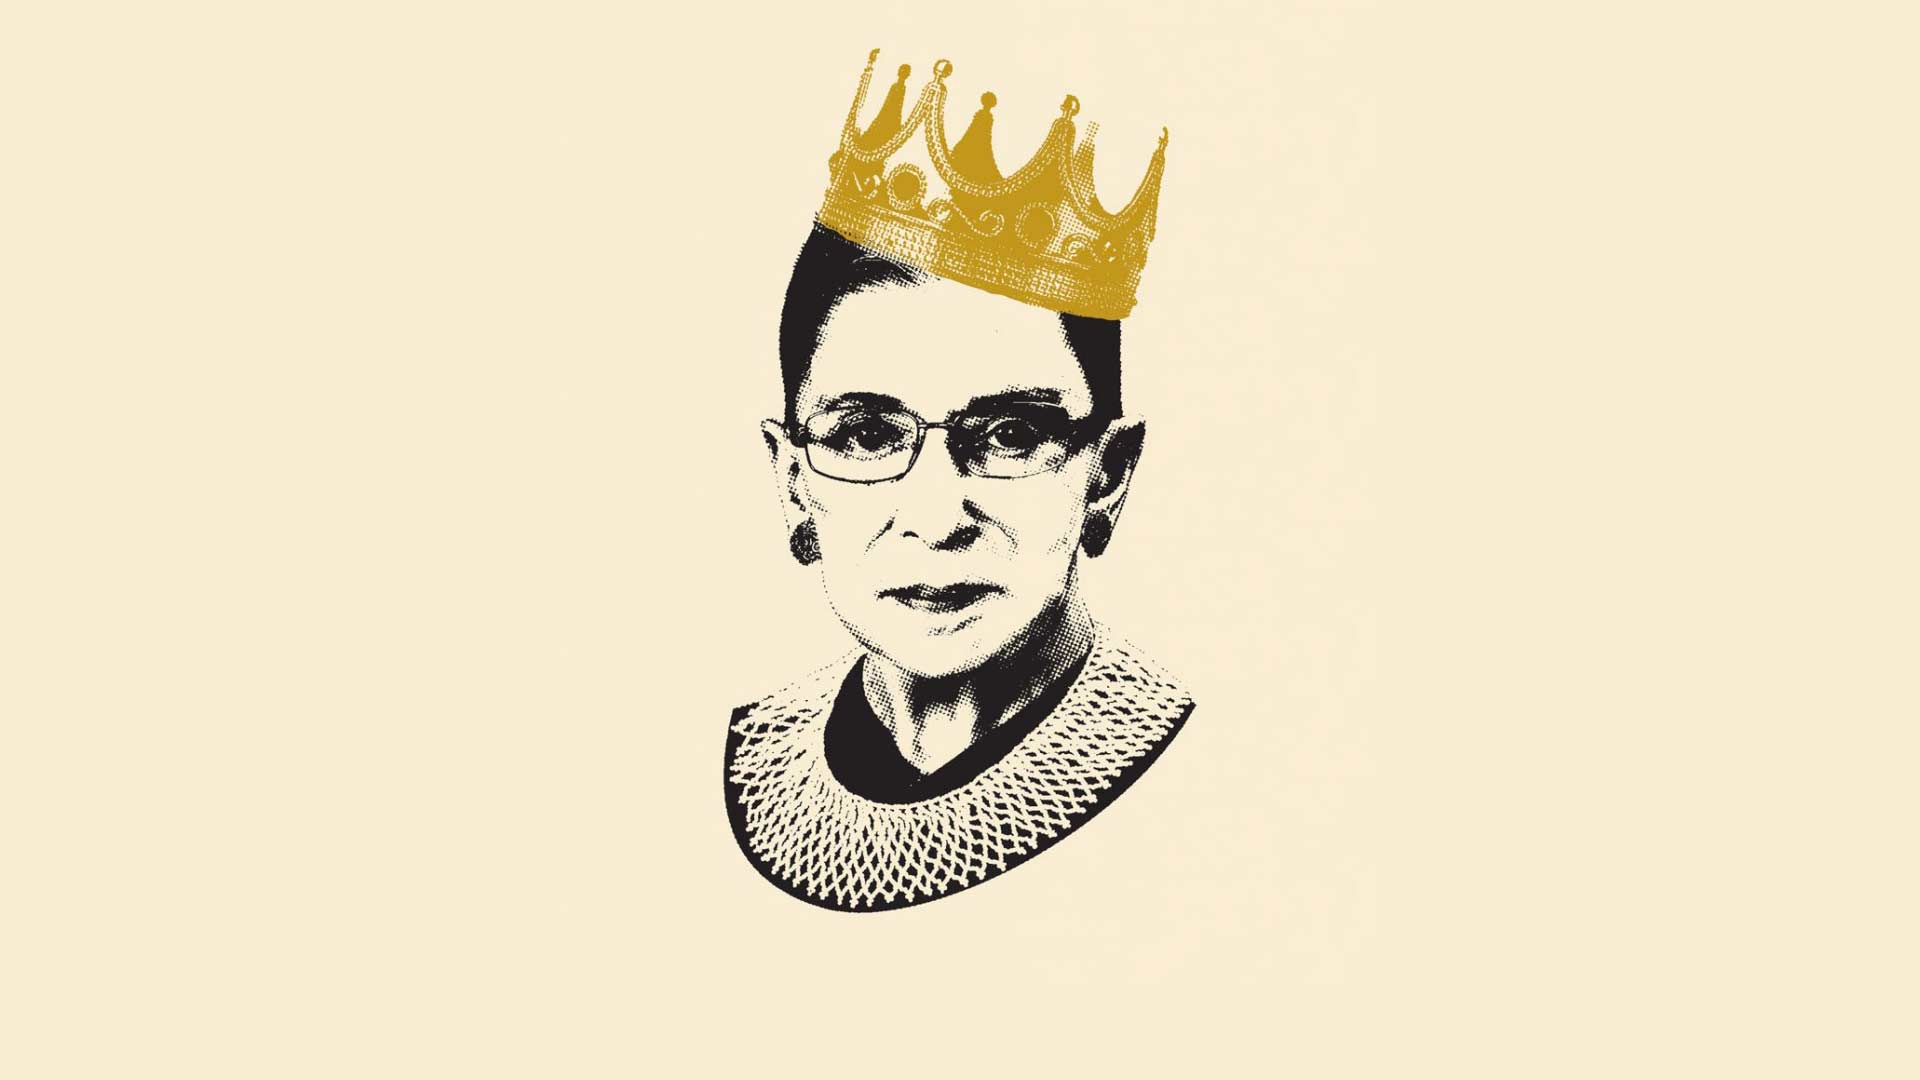 Queen of the Supremes Ruth Bader Ginsberg nearly made it